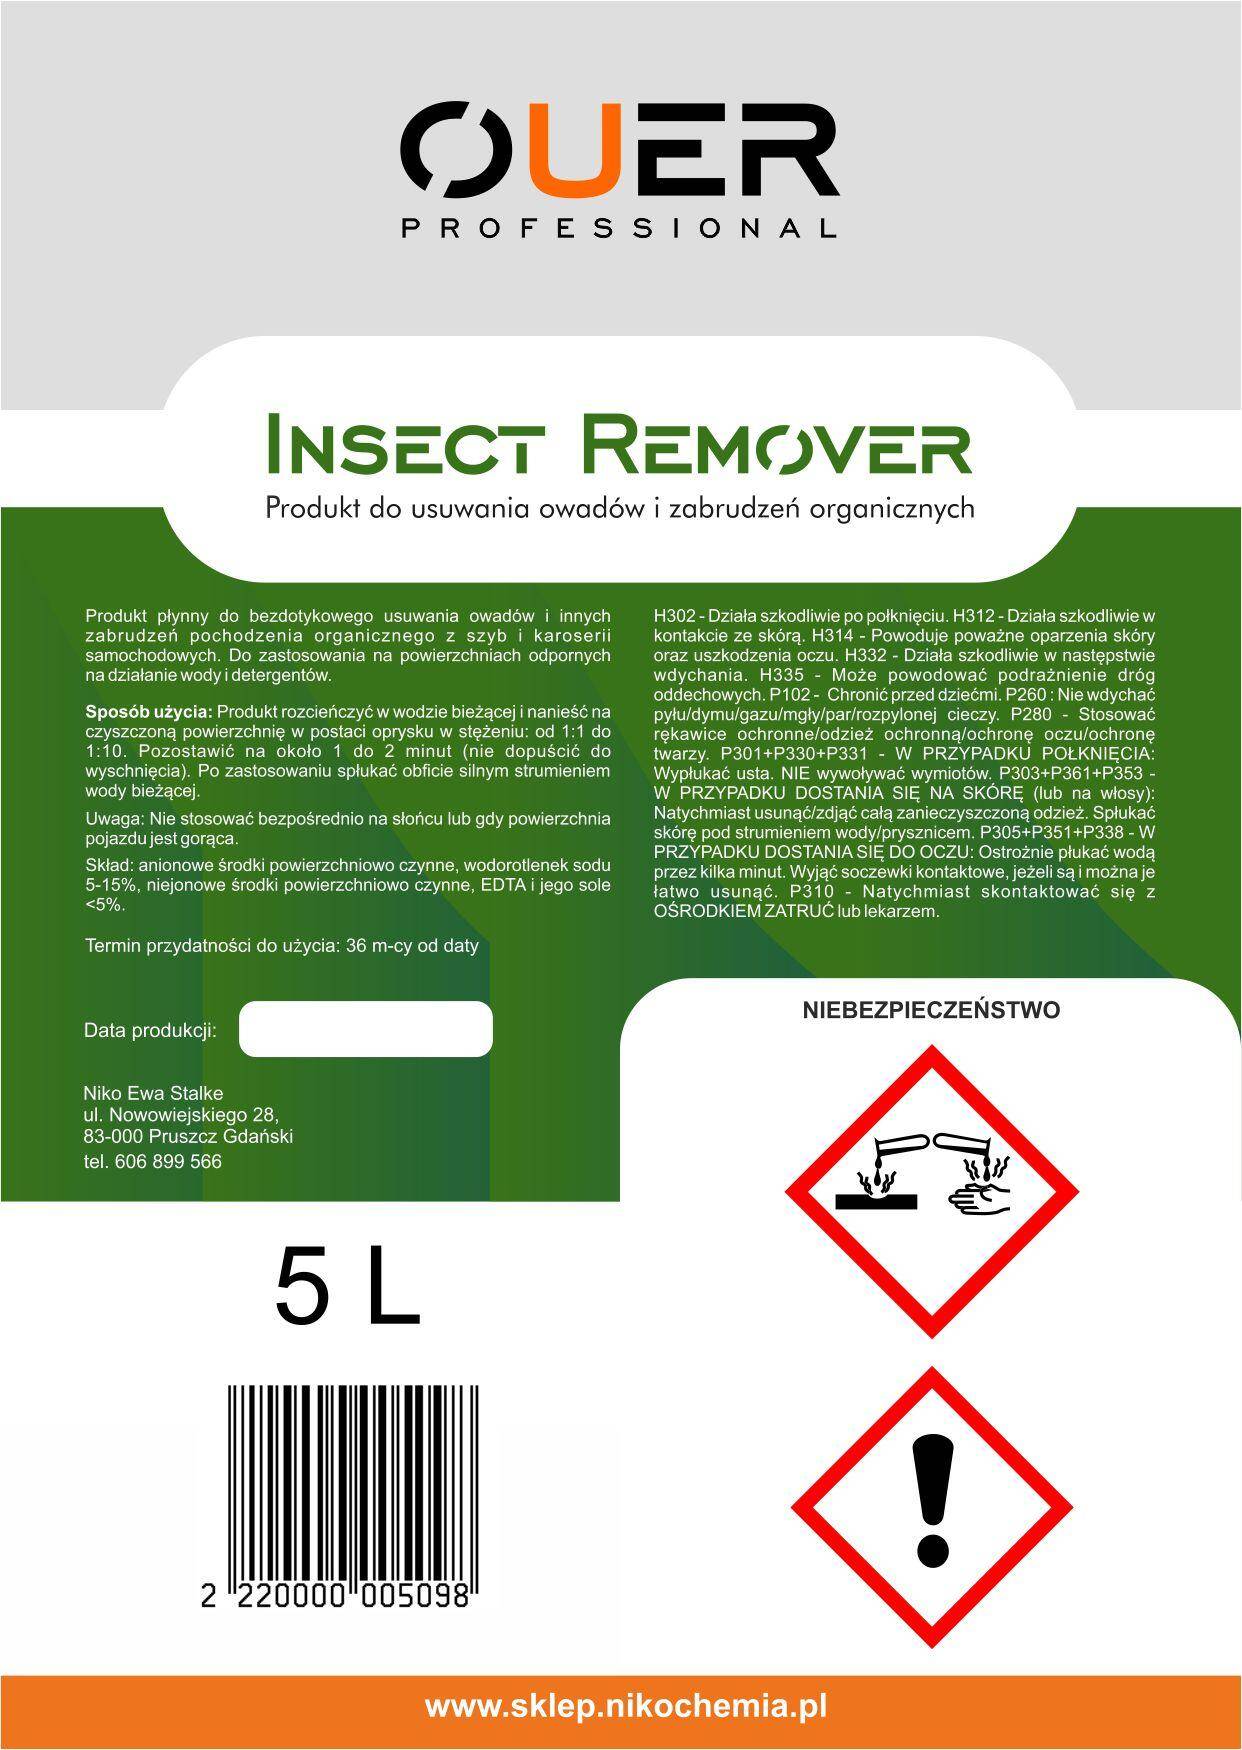 OUER - Insect Remover 5l (Zdjęcie 2)